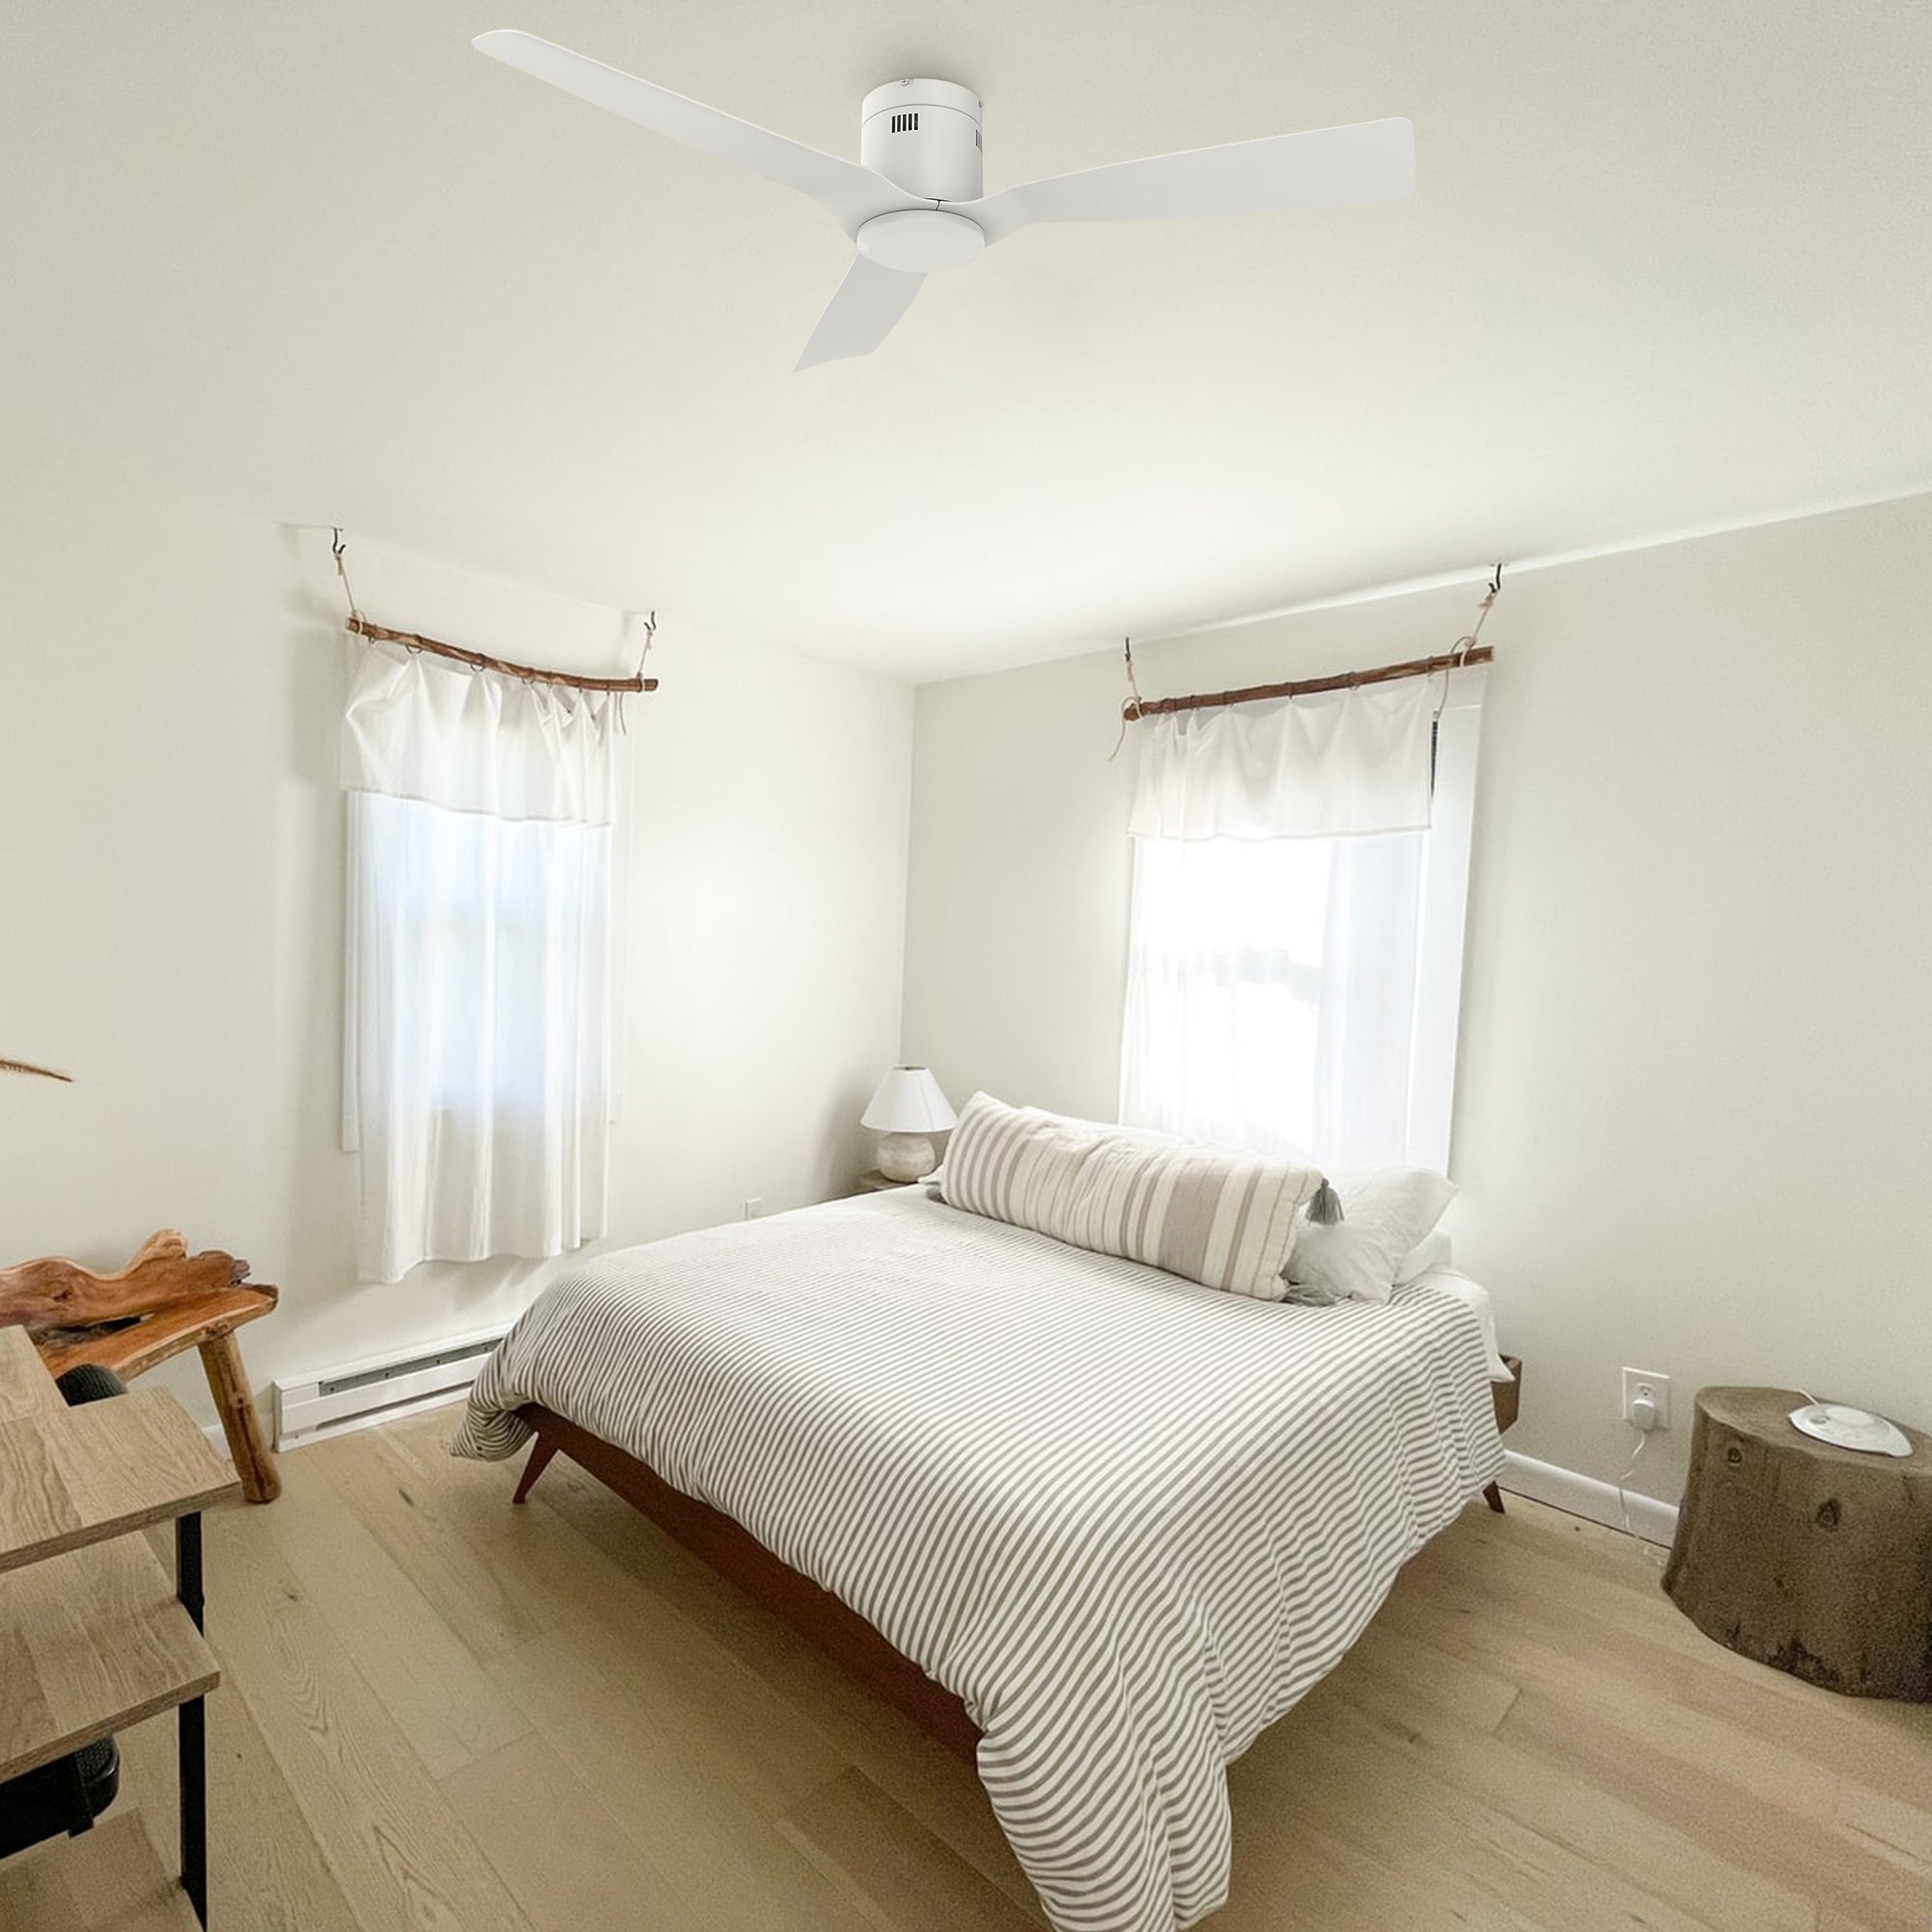 This Modena 52&#39;&#39;ceiling fan keeps your space cooland stylish. It is a soft modern masterpiece perfect for your indoor living spaces. This ceiling fan is a simplicity designing with White finish, use very strong ABS blades. 